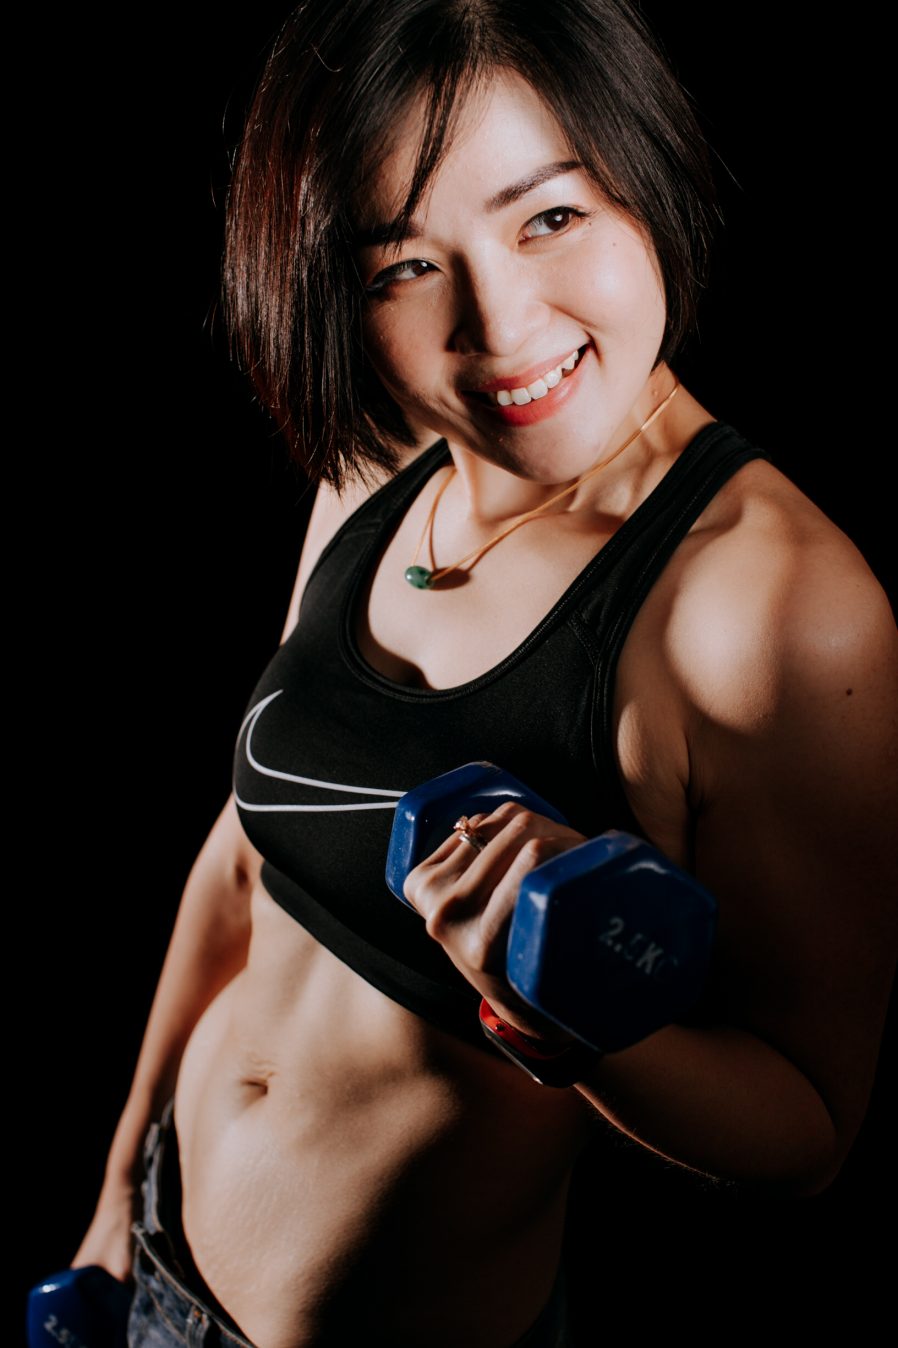 Fitness Portrait Photo Fitmom Woman Lady Studio Session Cliff Choong Photography